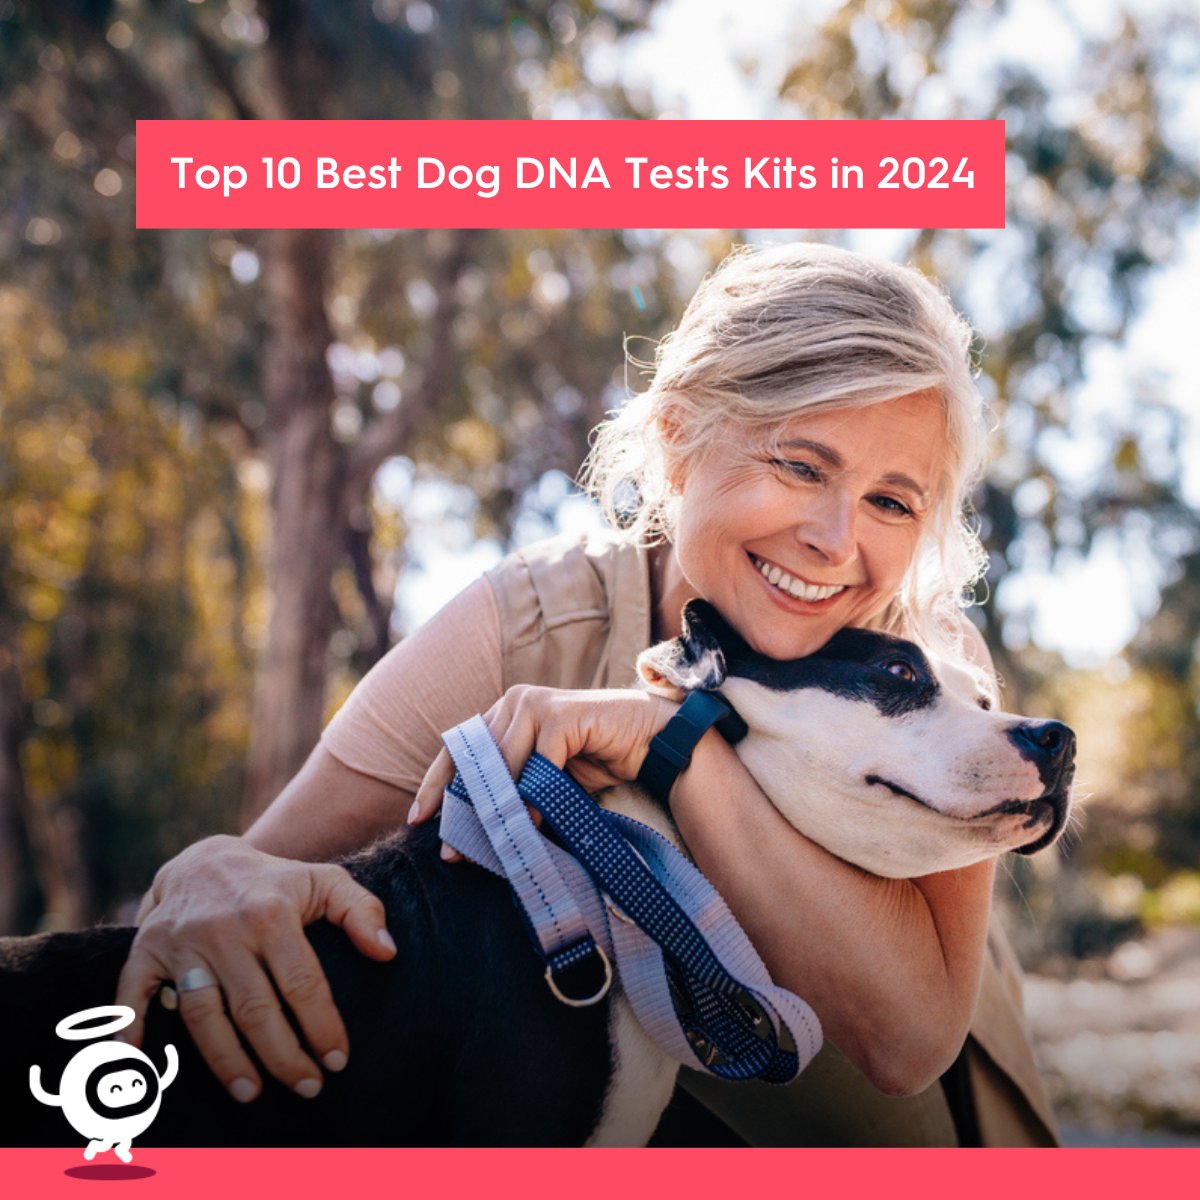 Want to get a DNA test for your fur baby 🐶🐱? These are the Top 10 Best Dog DNA Tests Kits in 2024: bit.ly/4as6WNY #pet #pets #petlife #pethealth #dna #dnatest #petdna